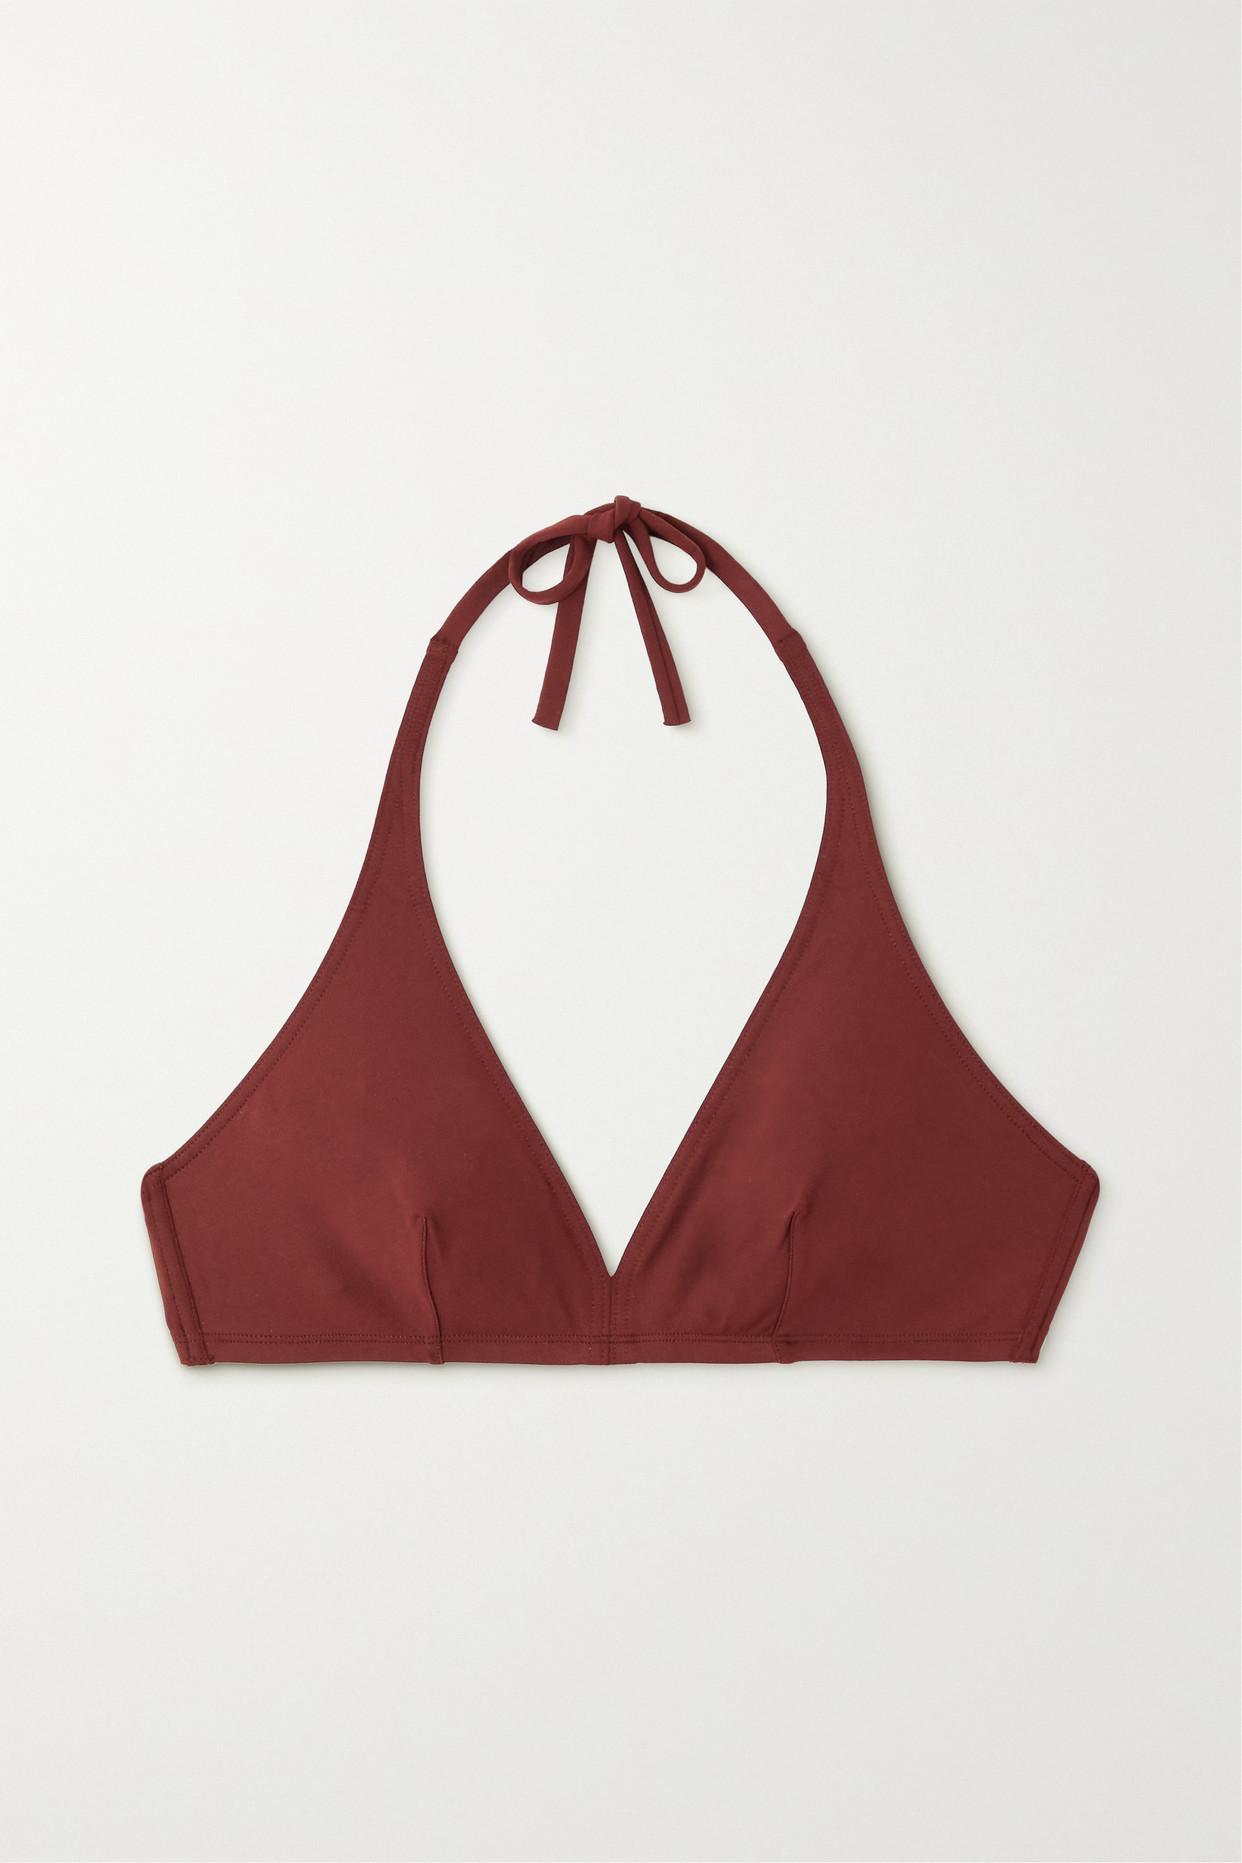 Eres Les Essentiels Gang Triangle Bikini Top in Red | Lyst